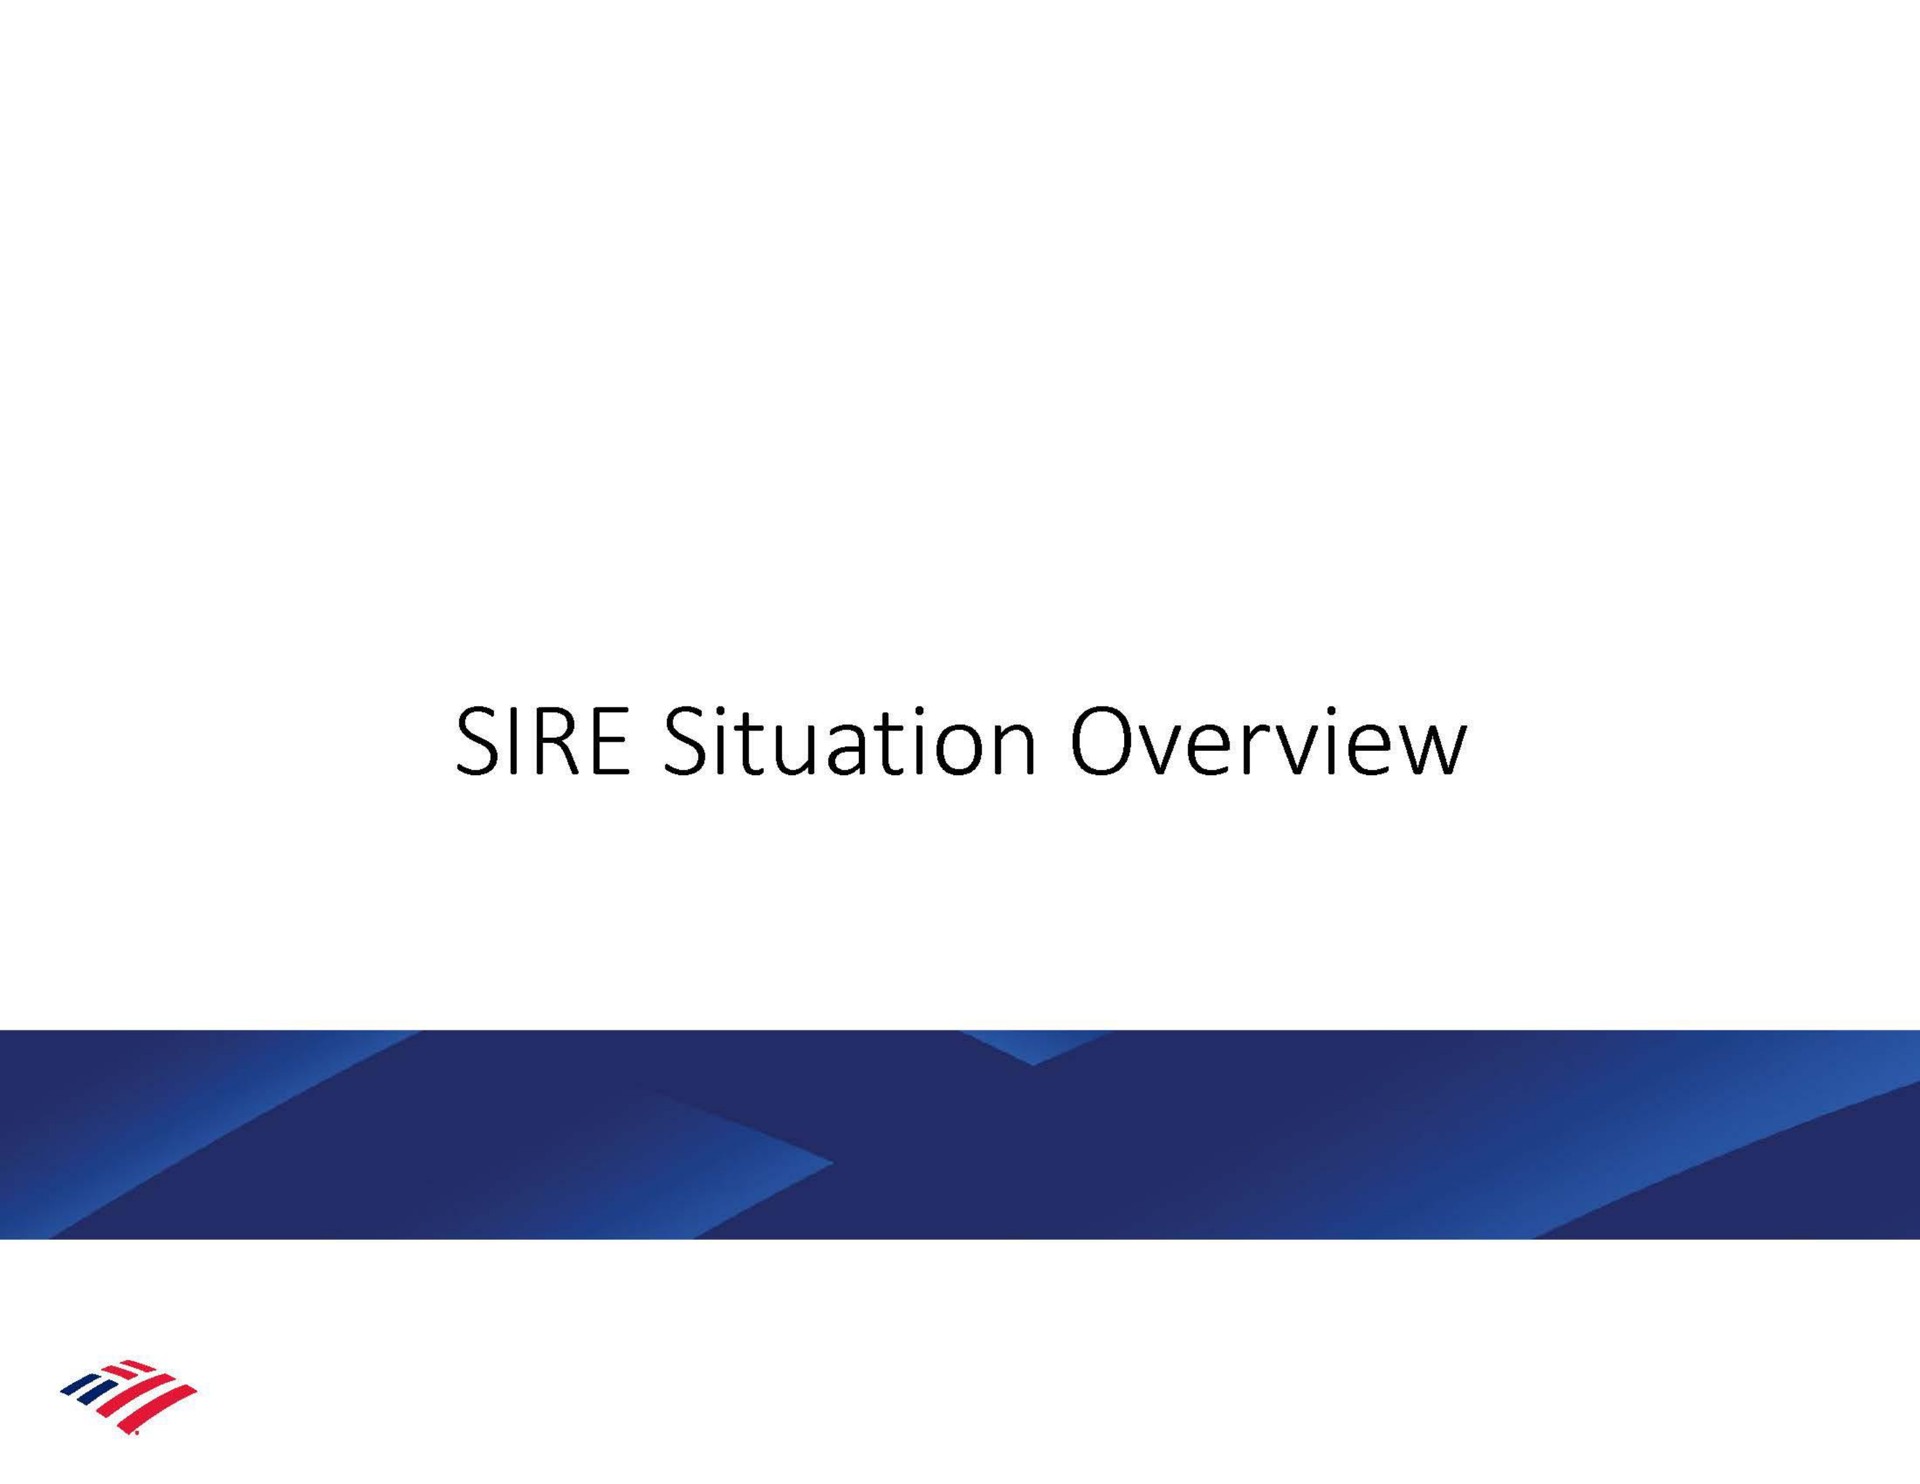 sire situation overview | Bank of America